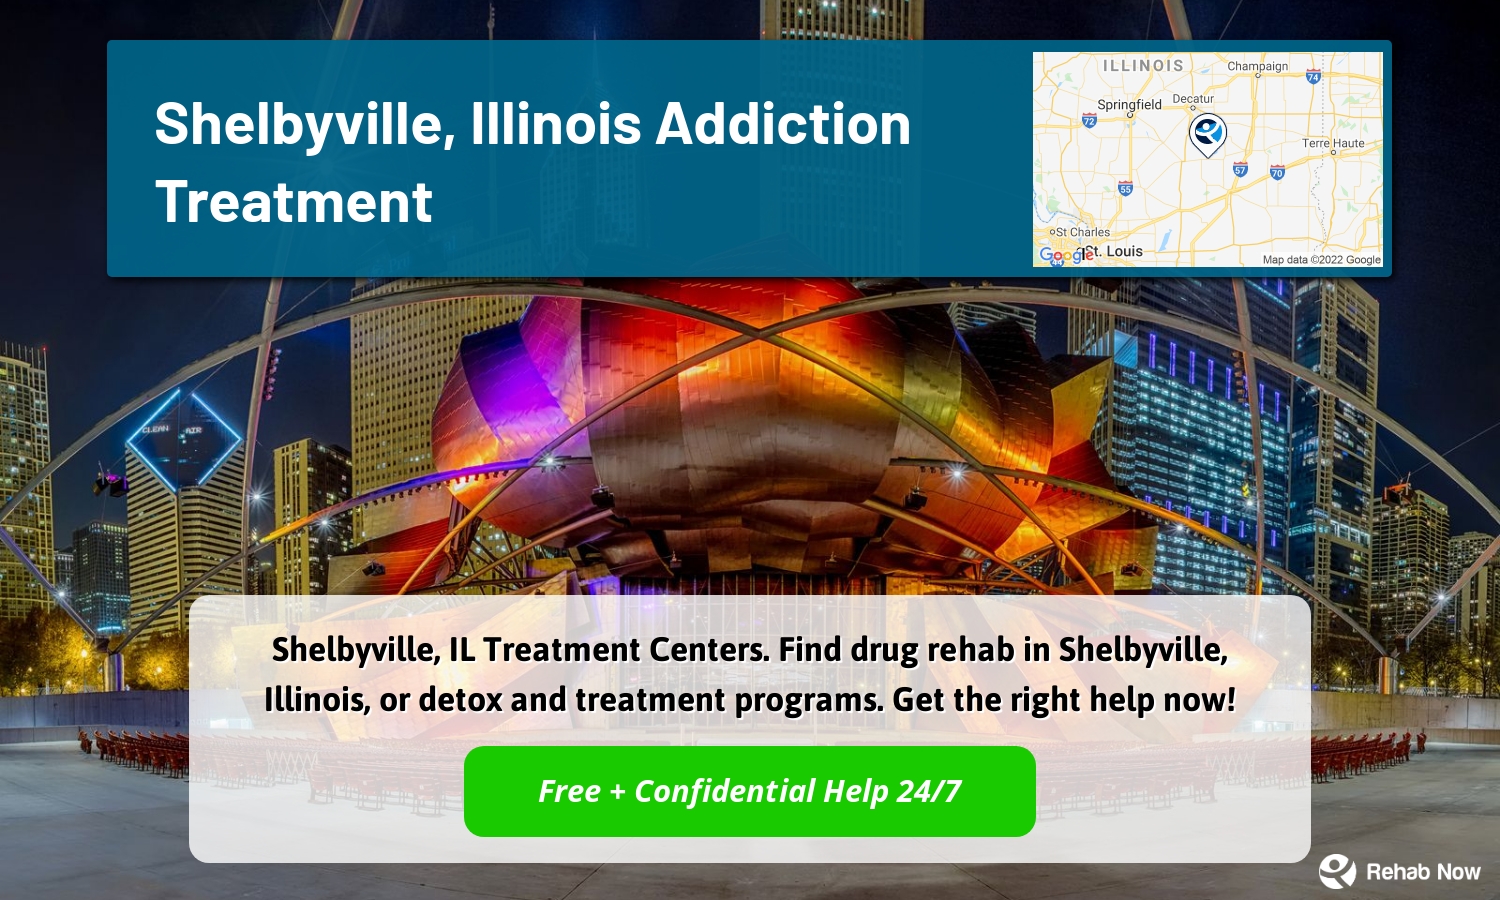 Shelbyville, IL Treatment Centers. Find drug rehab in Shelbyville, Illinois, or detox and treatment programs. Get the right help now!